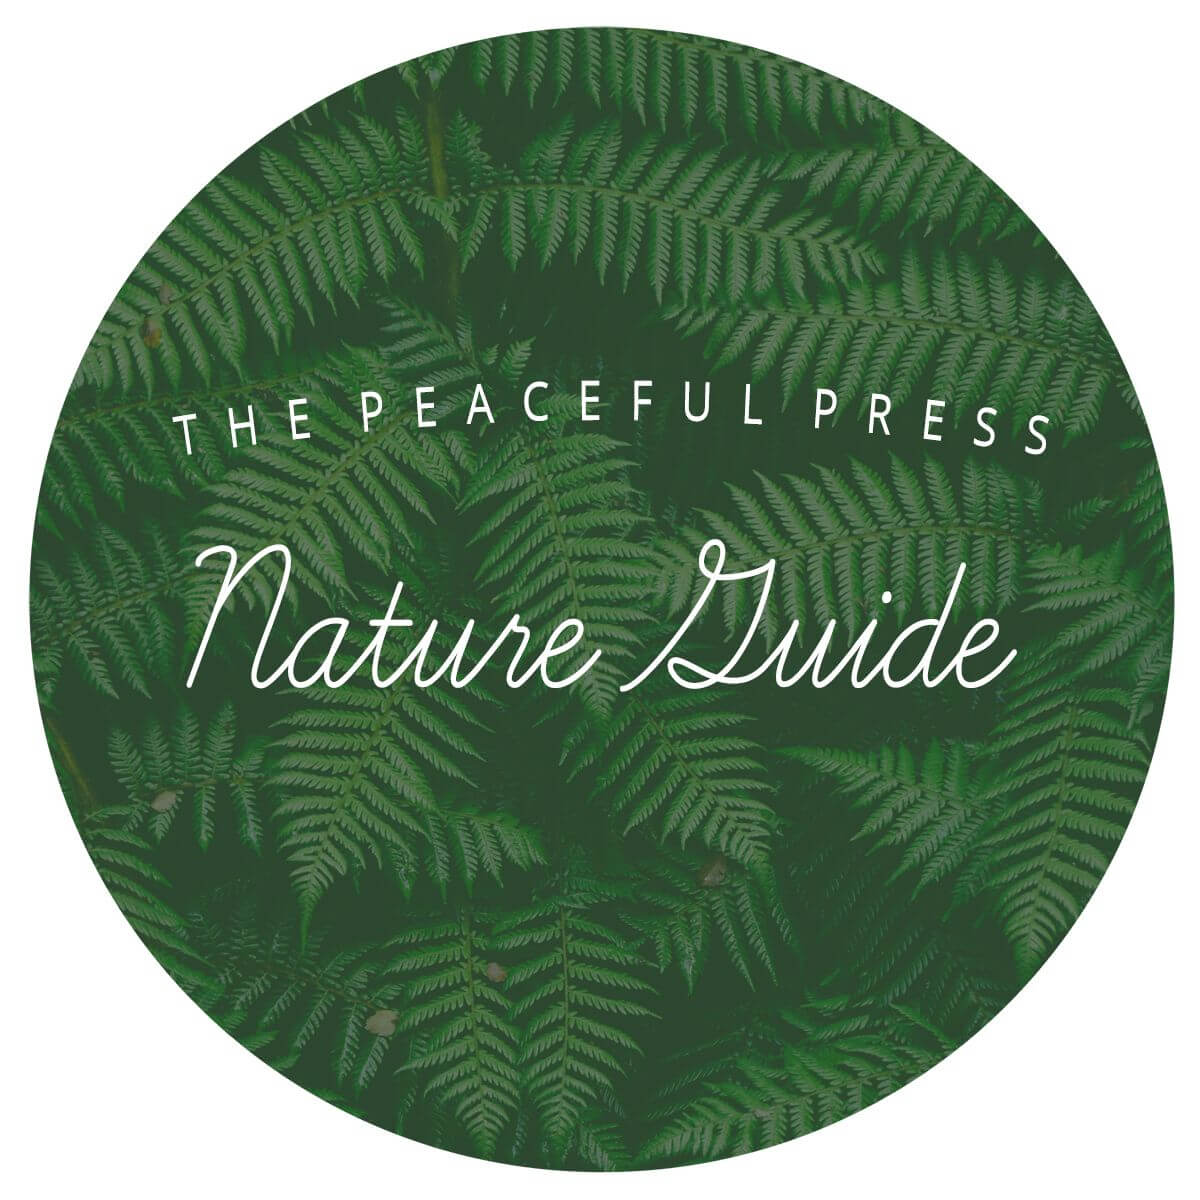 A circle filled with green ferns on a white field with the words: The Peaceful Press, Nature Guide over the circle.